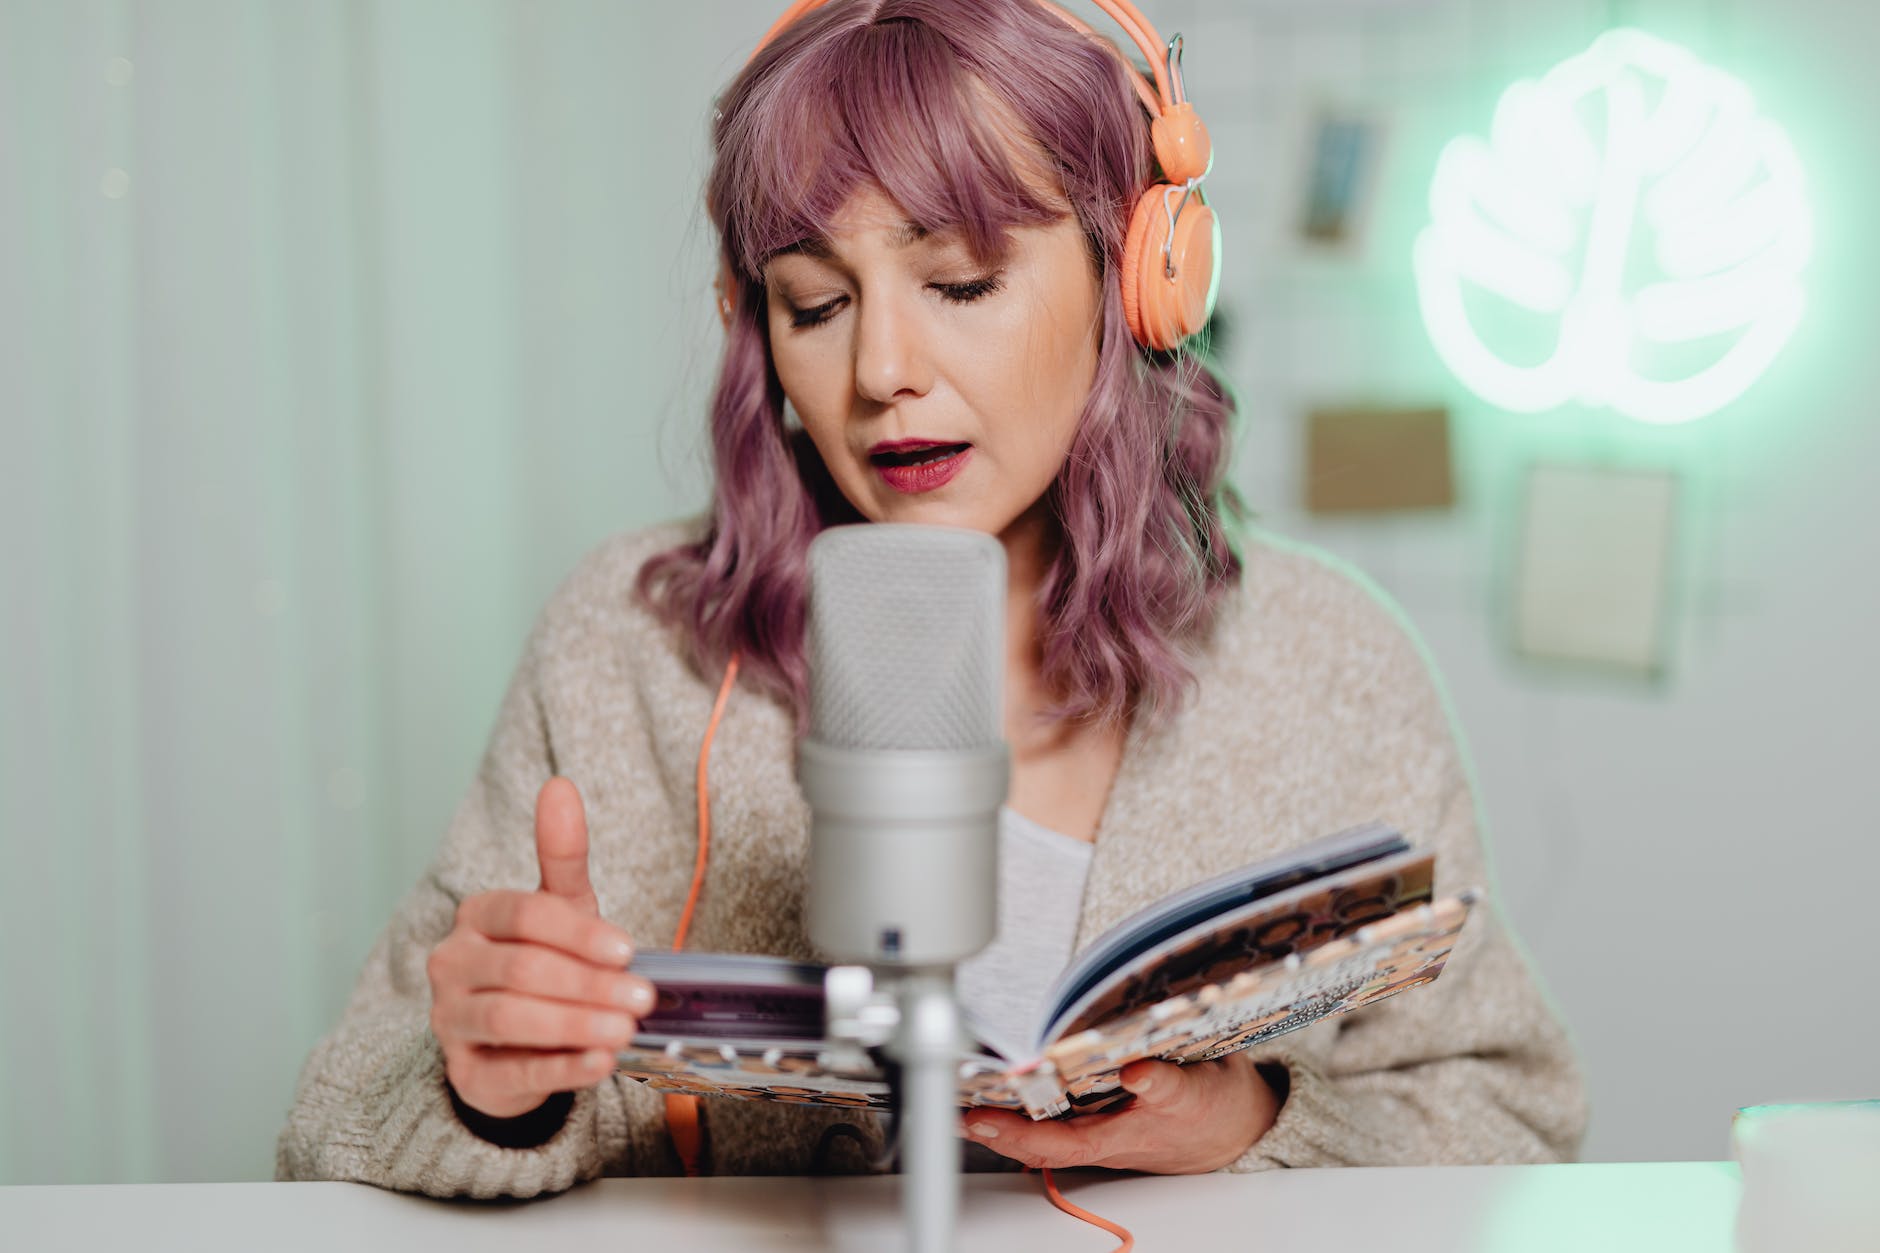 a woman talking on a microphone while reading a book